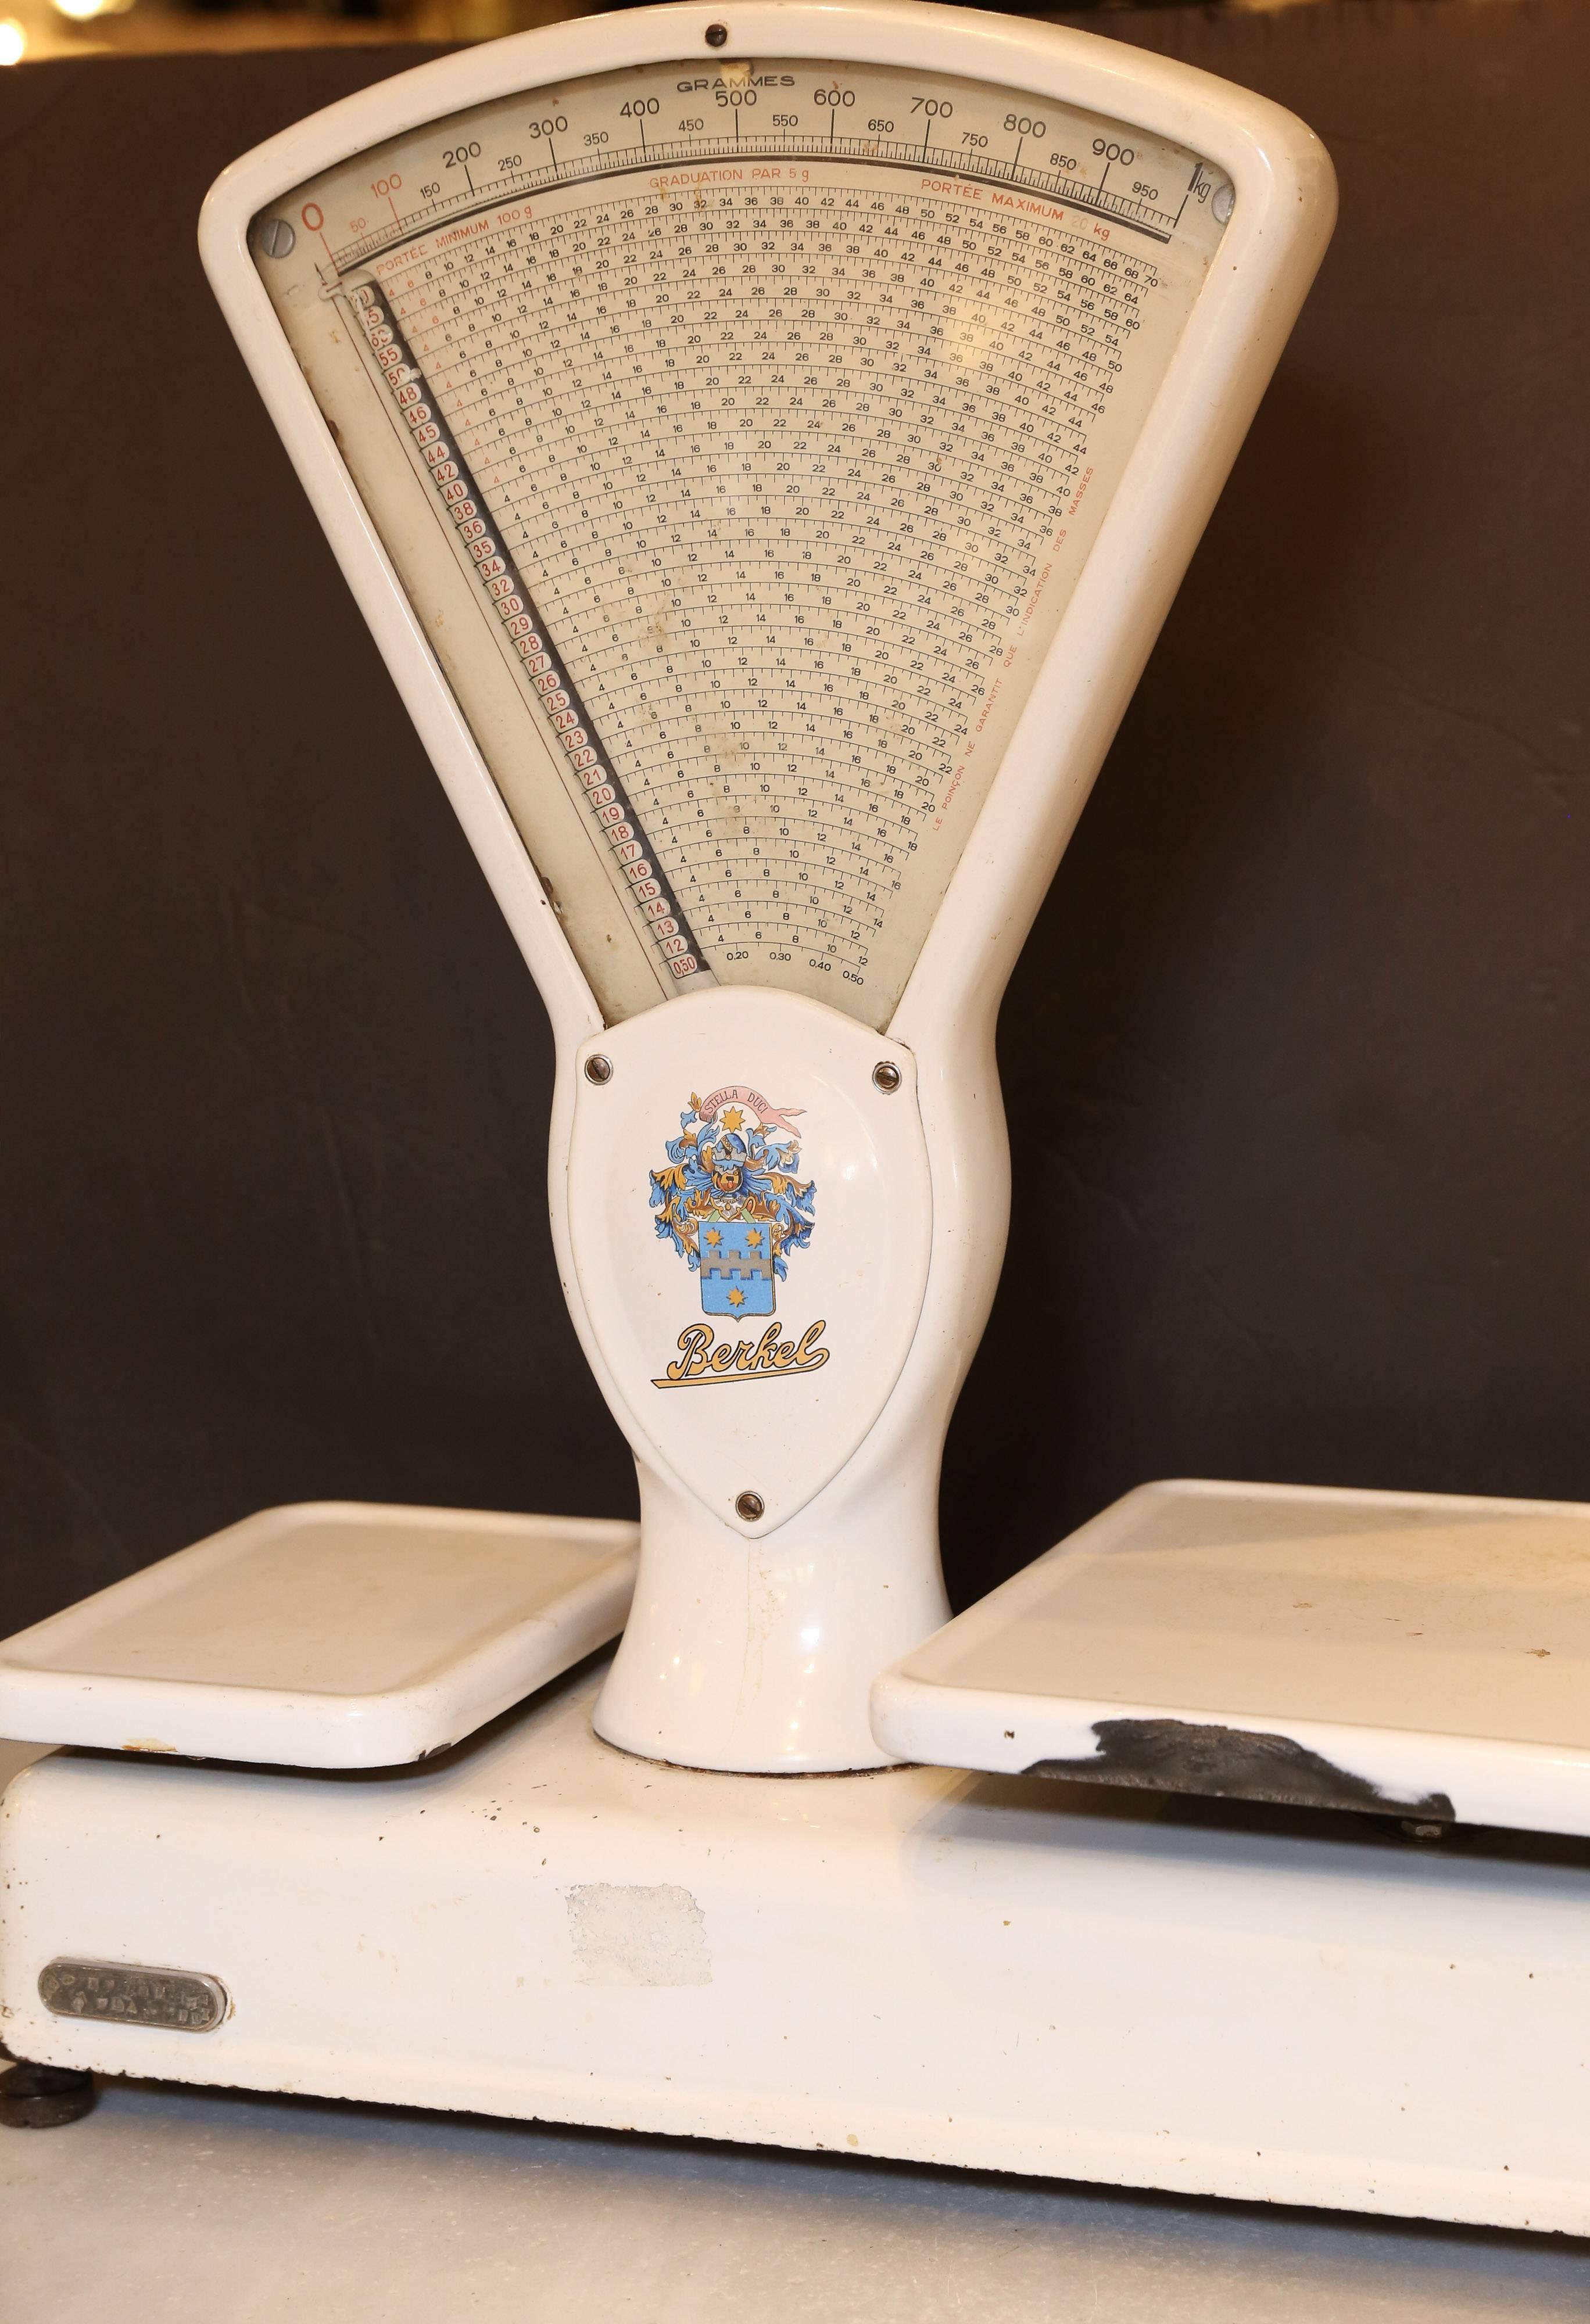 From the Berkel Auto Scale Co Ltd of Belgium, a Stella Duci Edition white enameled iron scale. Weighs in Grams. In very good condition with some traces of use. A beautiful addition to your home or shop.